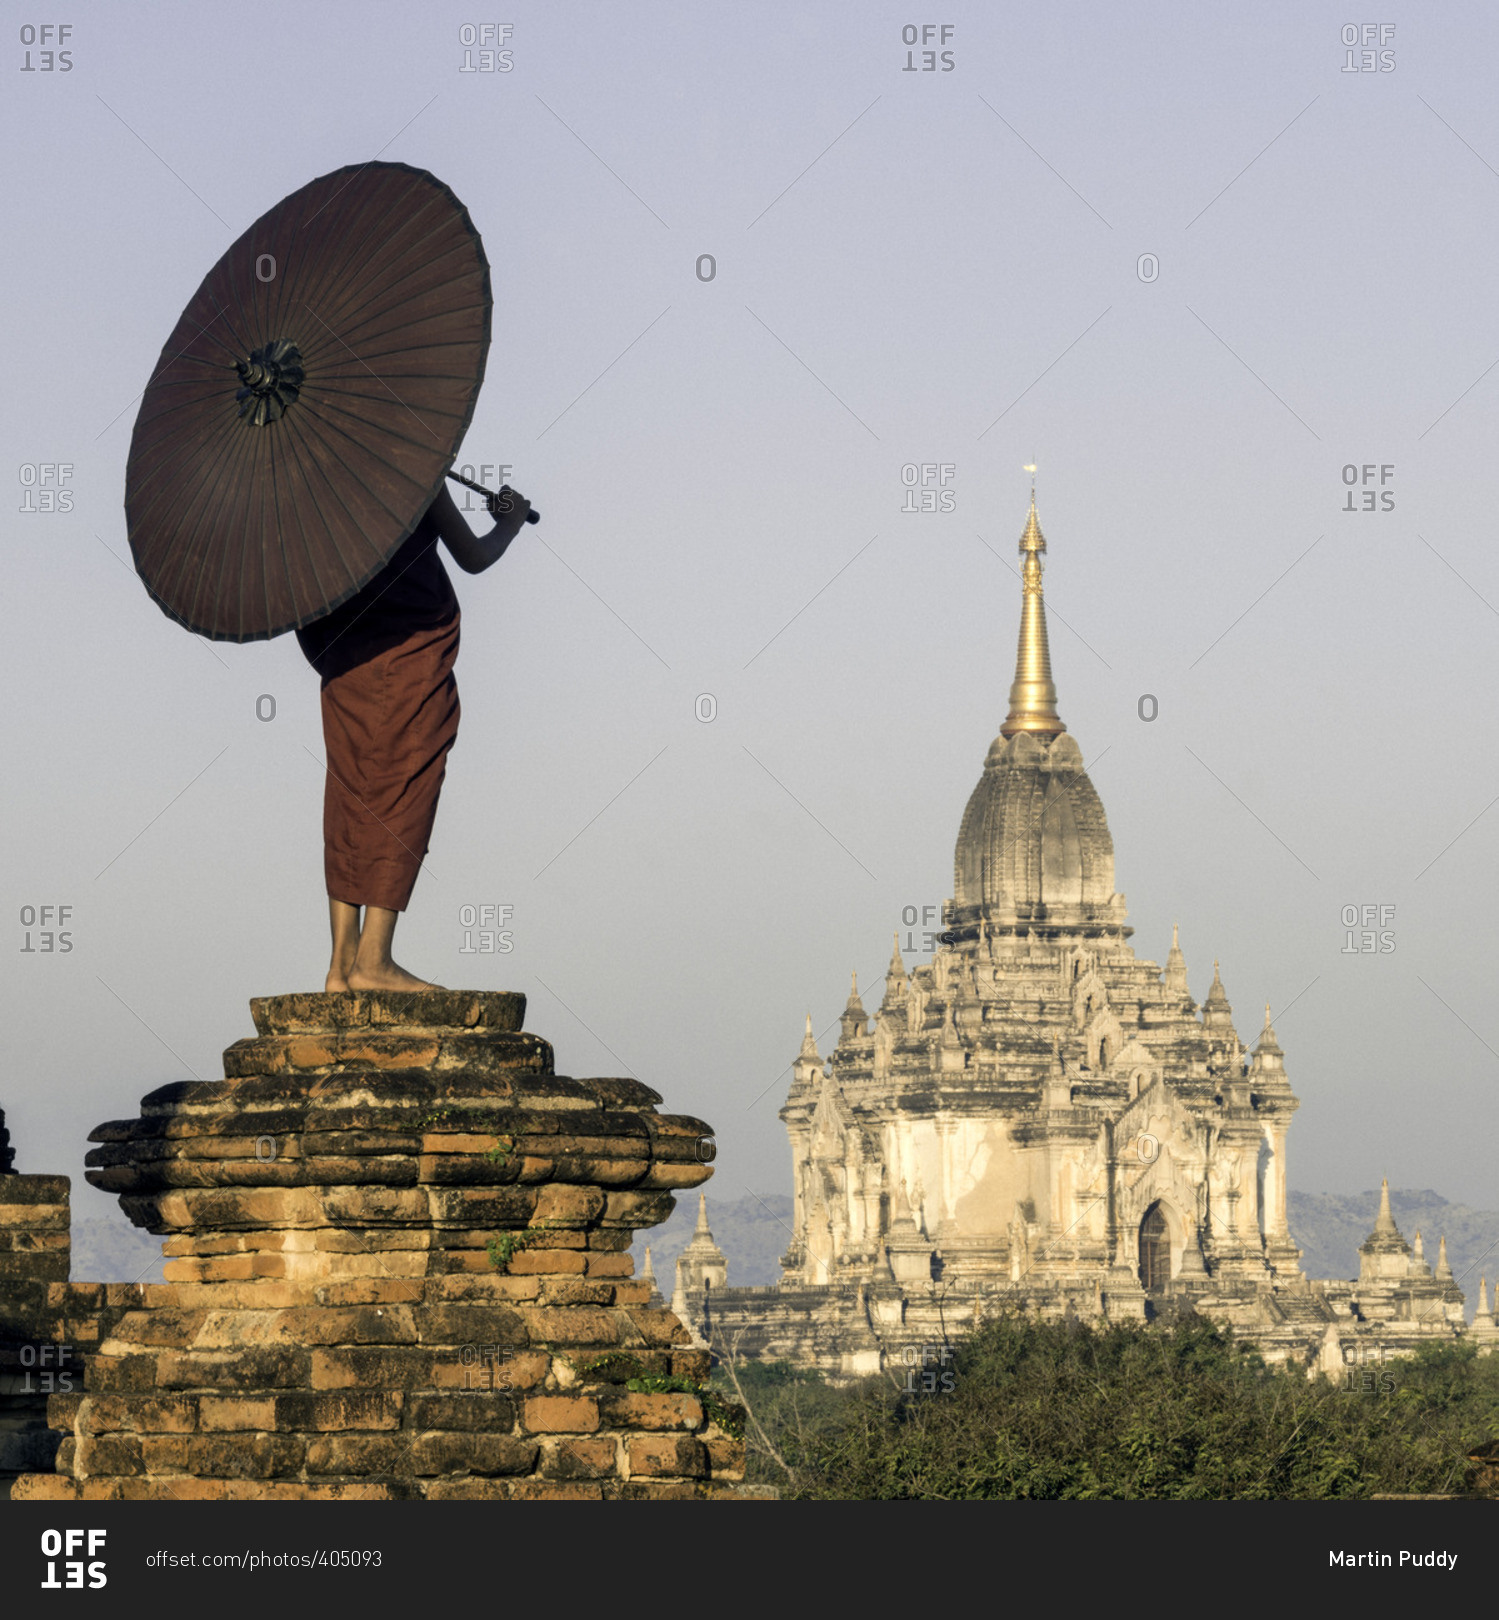 Young Buddhist monk standing on temple top holding a parasol in front of an ancient temple